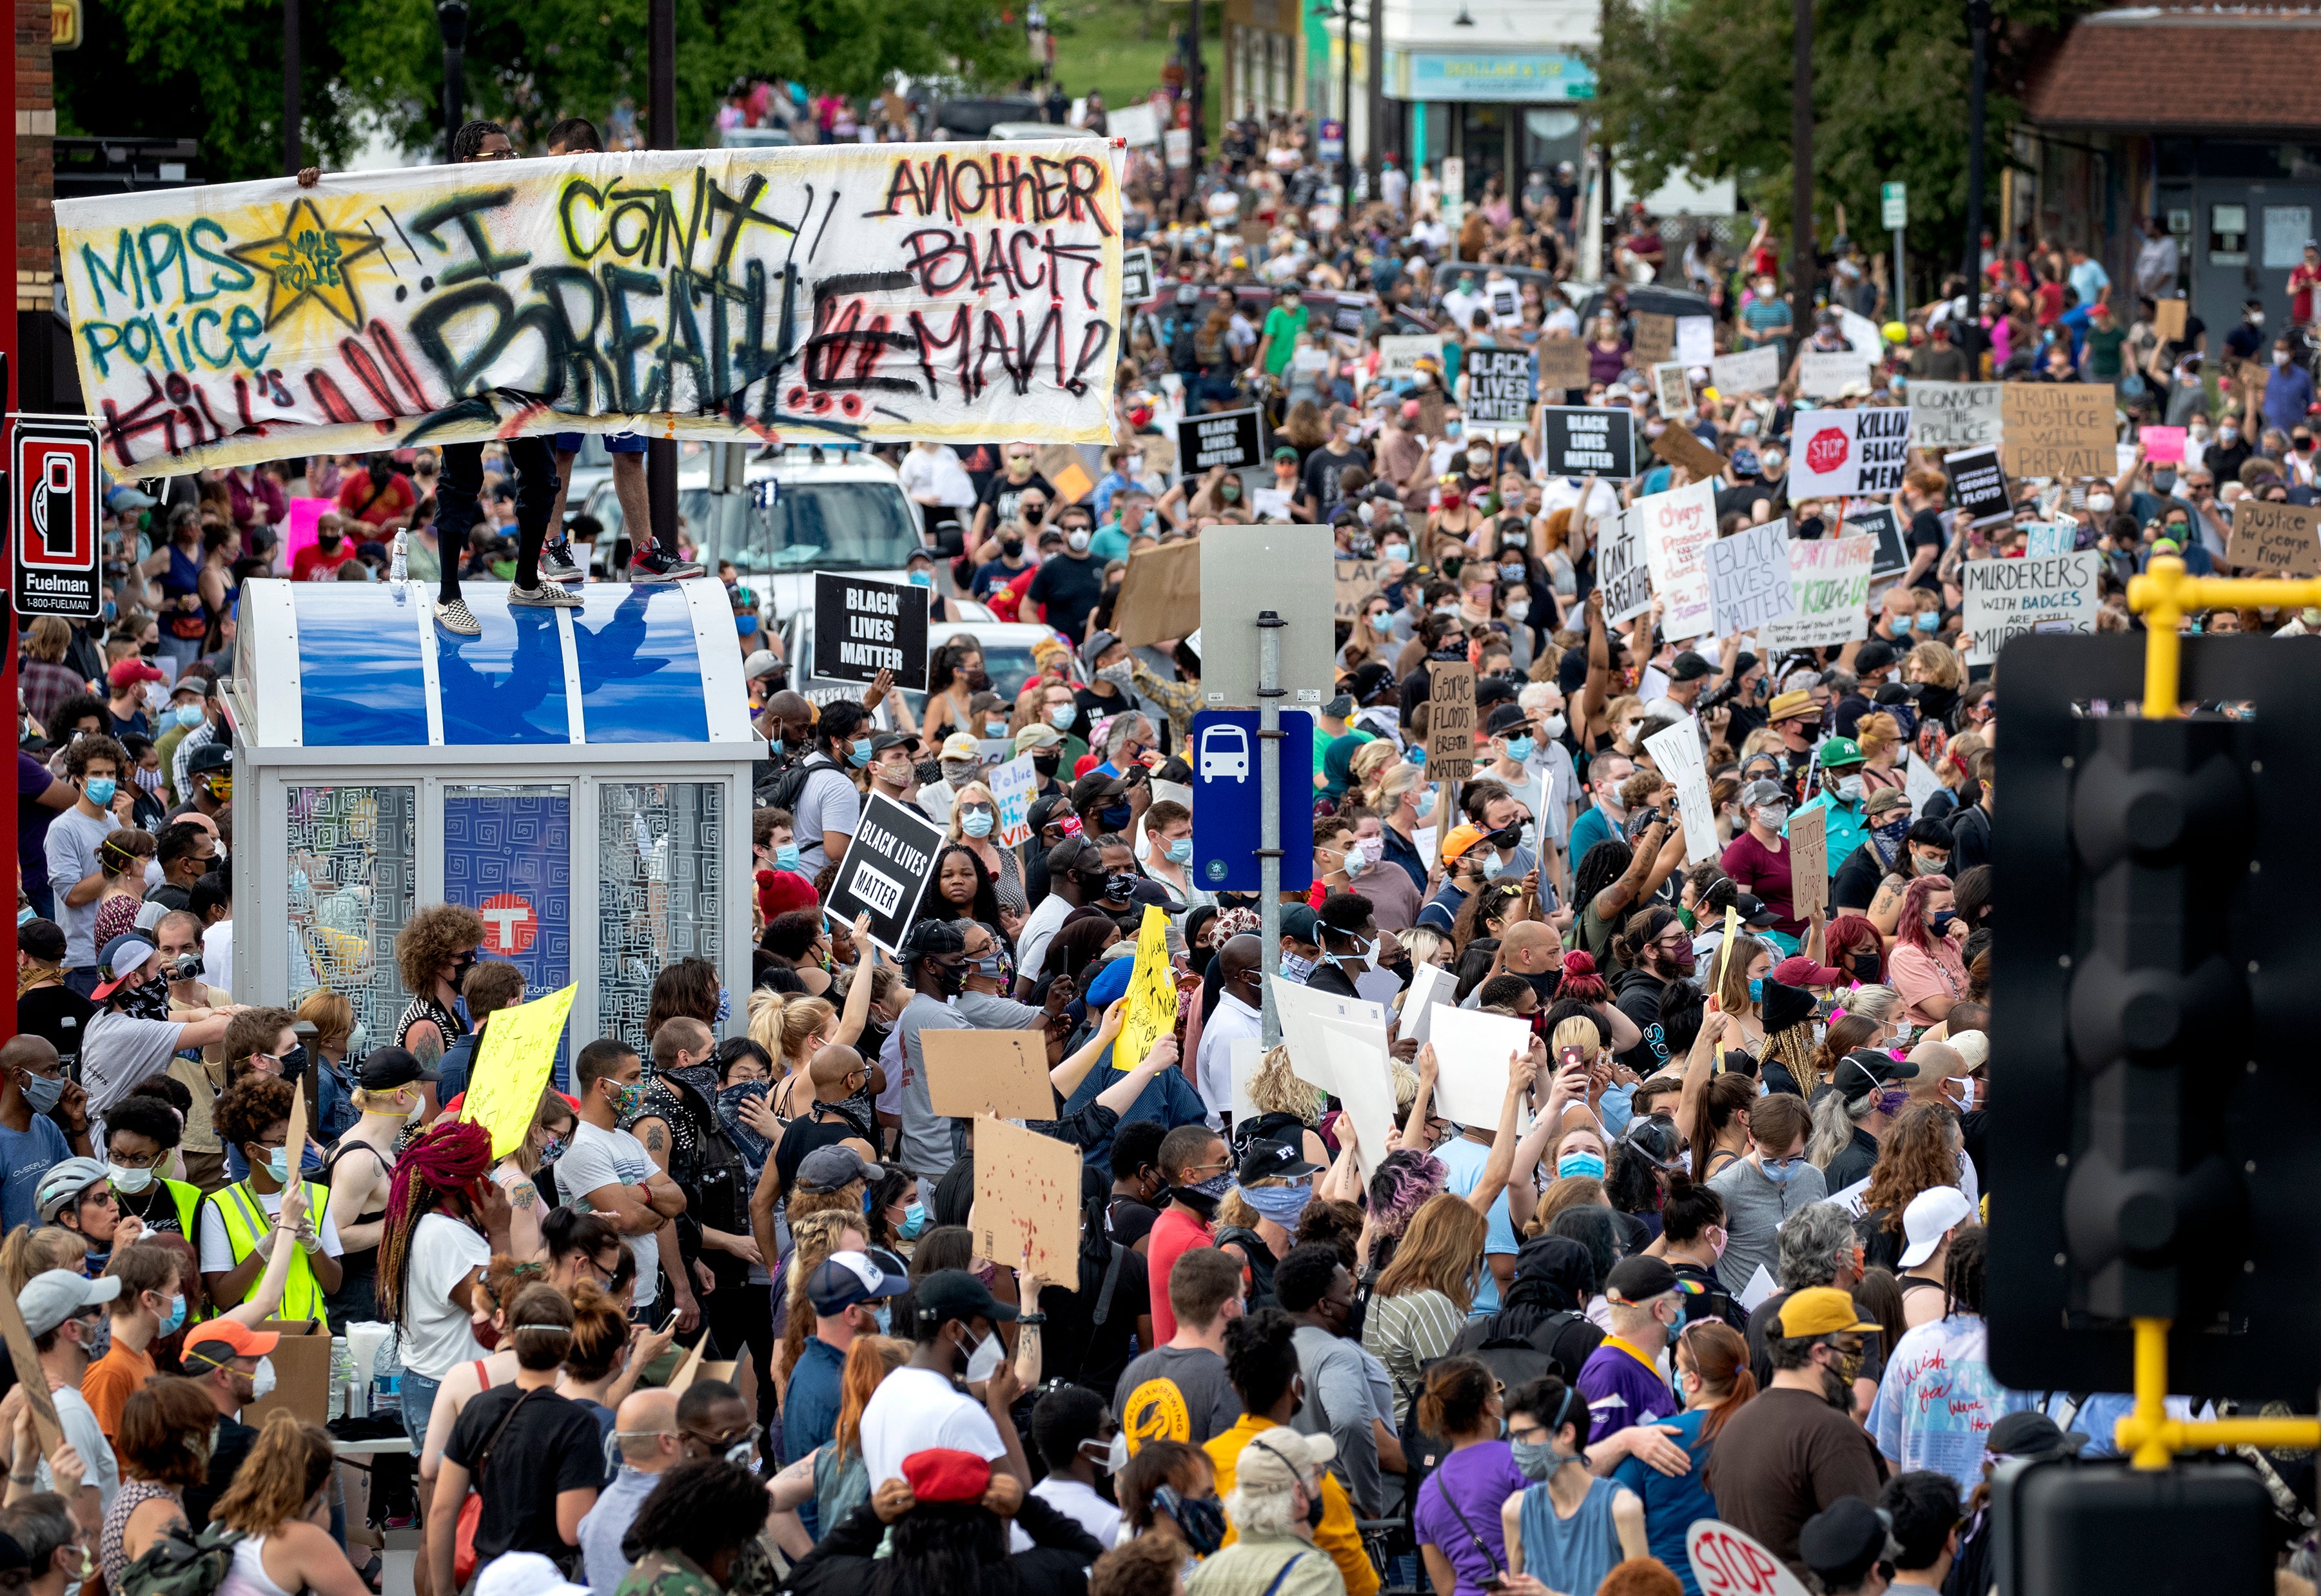 The 2020 racial justice uprisings were the largest protests in US history